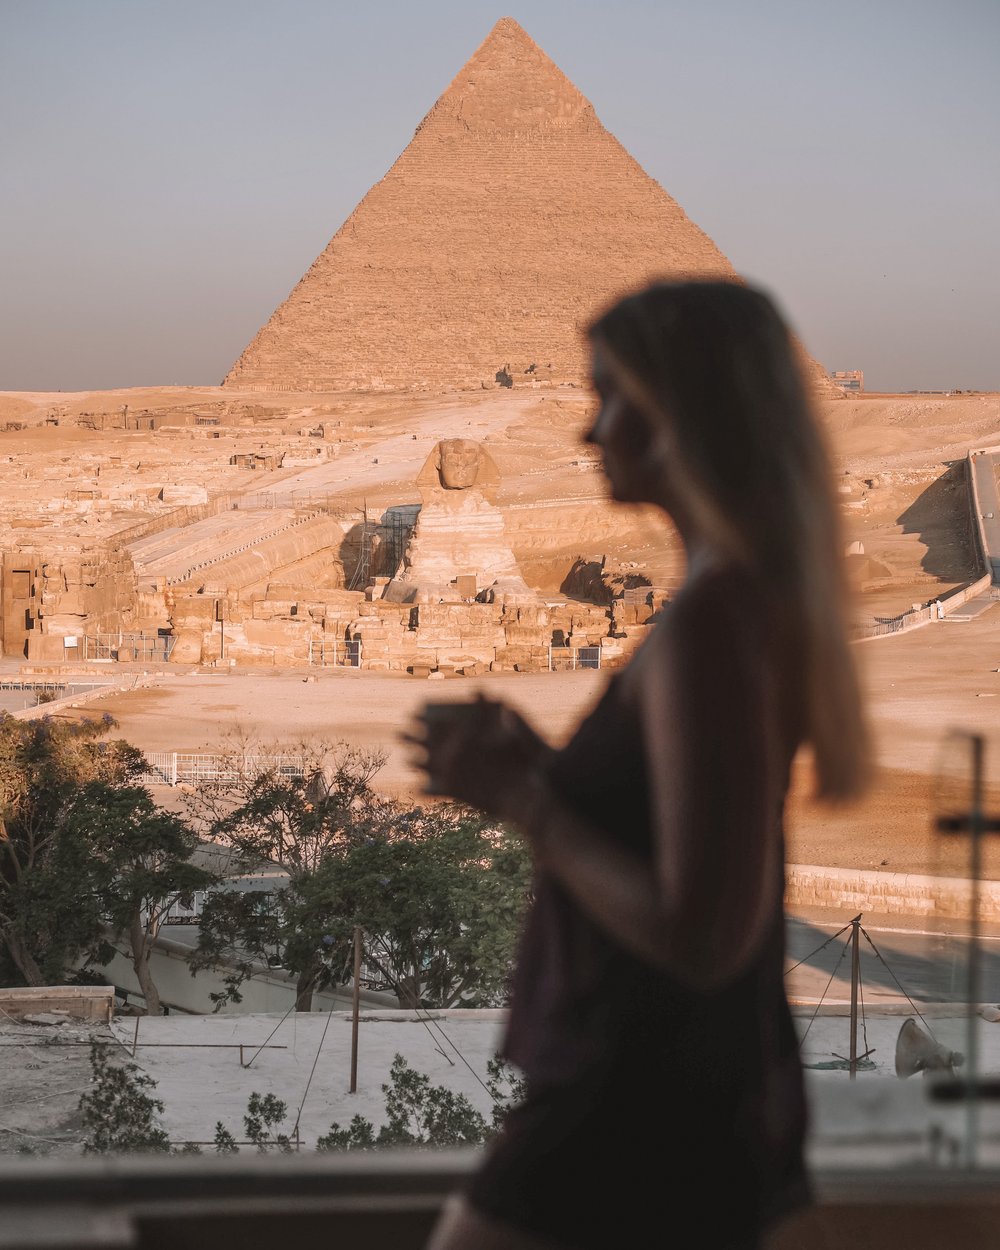 Morning coffee with the Sphinx and the Pyramids of Giza - Cairo - Egypt